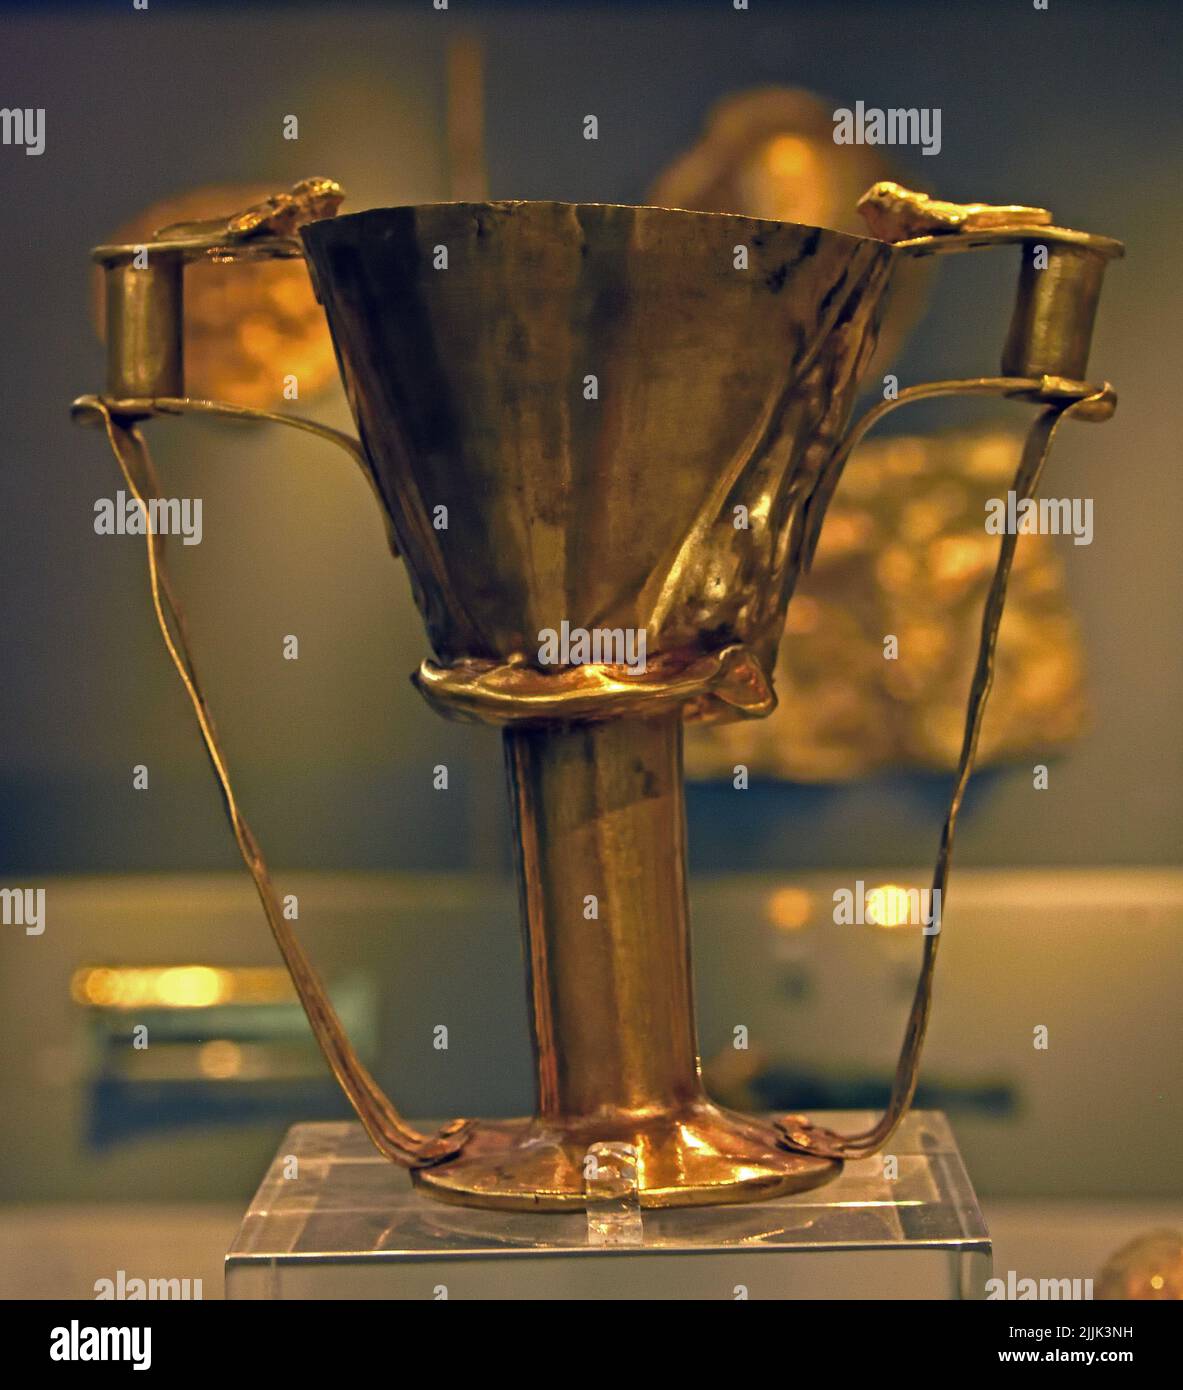 Cup of Nestor or dove cup is a gold goblet discovered in 1876 by Heinrich Schliemann in Shaft IV of Grave Circle A, Mycenaean Greece , Mycenaean civilization, Bronze Age in Ancient Greece 1750 to 1050 BC, Mycenae, National Archaeological Museum in Athens. Stock Photo